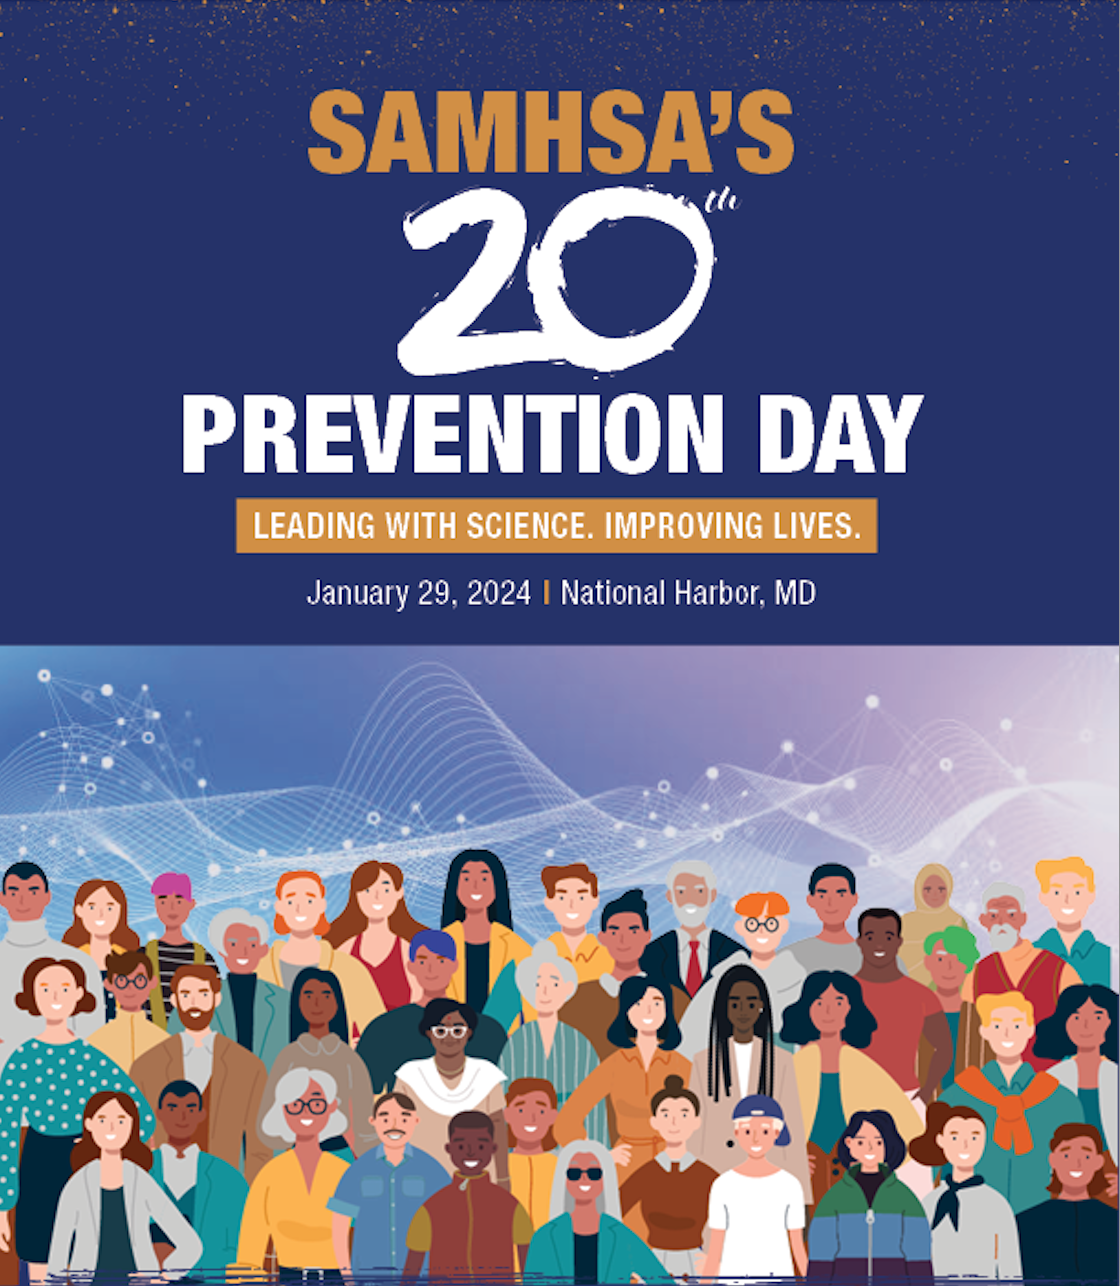 SAMHSA's 20th Prevention Day